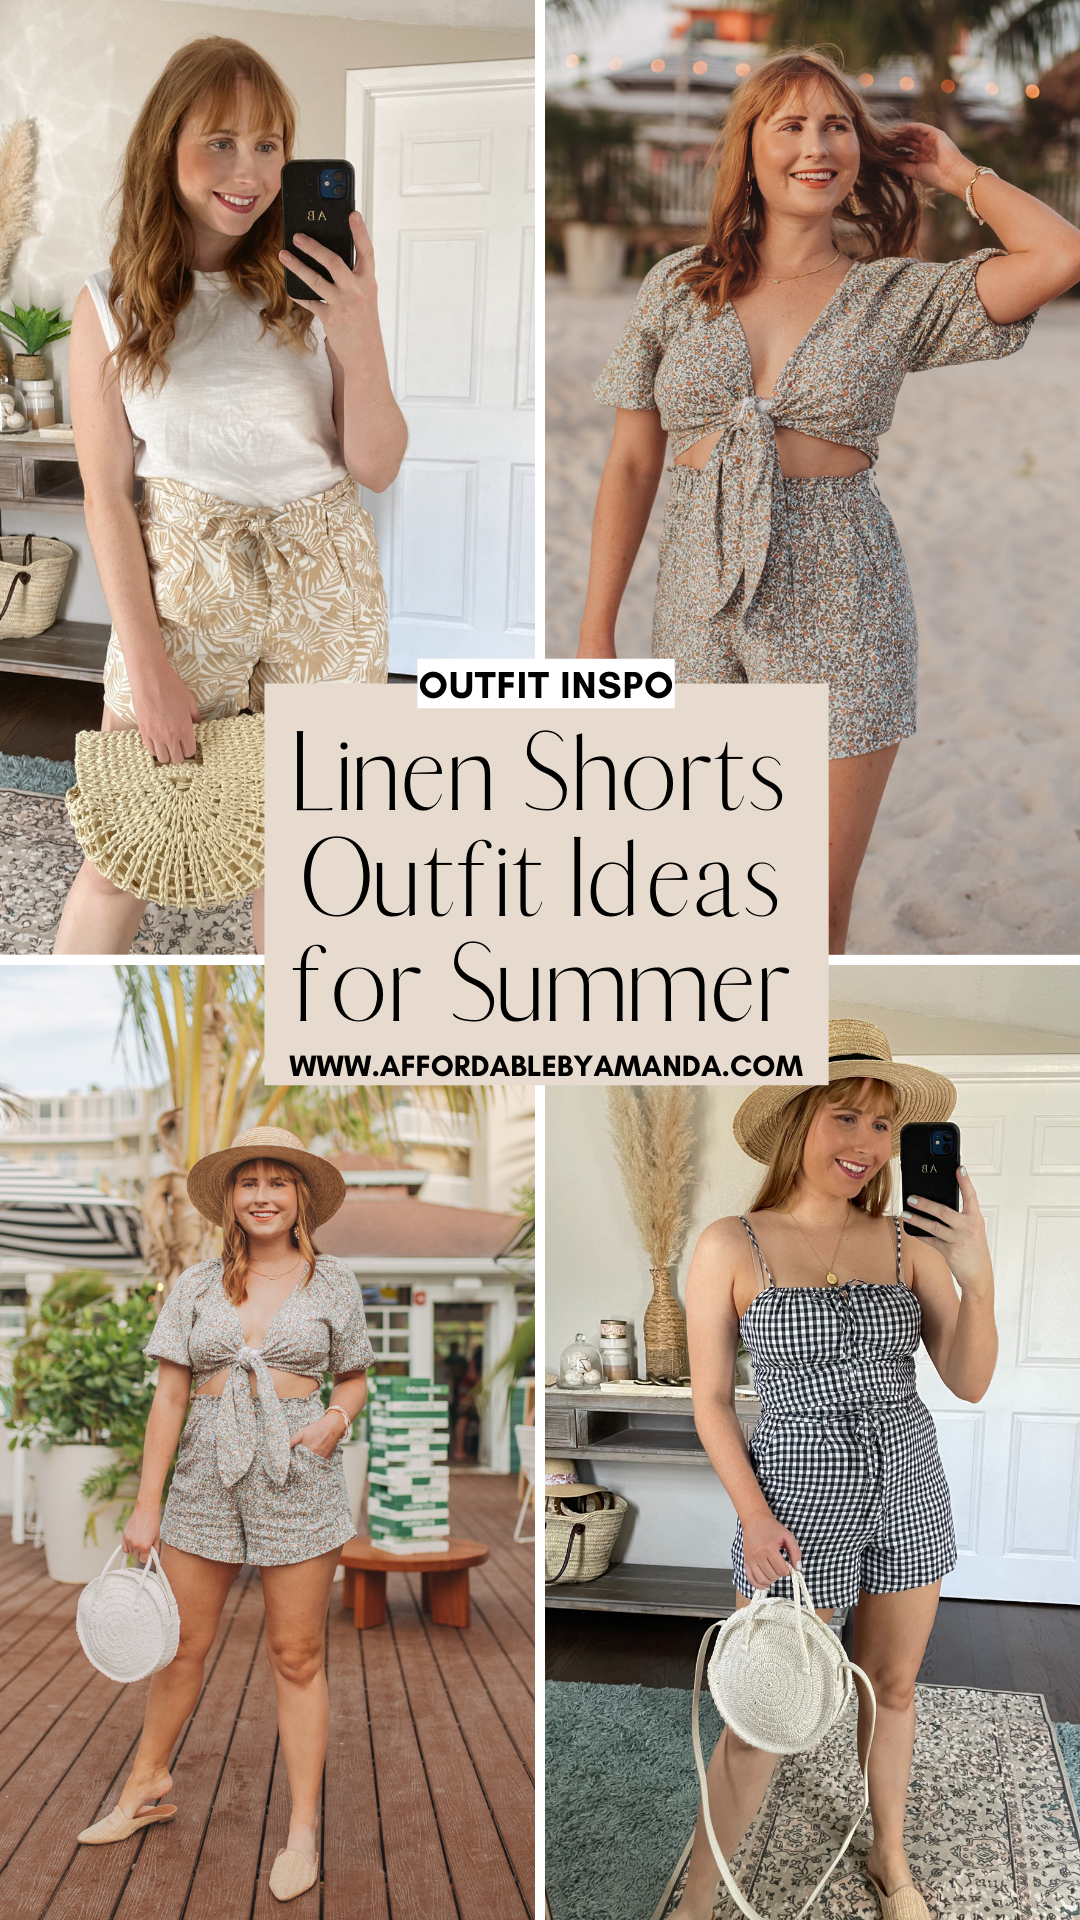 Outfits With Linen Shorts | Linen Shorts Outfit Ideas for Summer 2021 | Linen Shorts and Top Set | Linen Shorts for Women